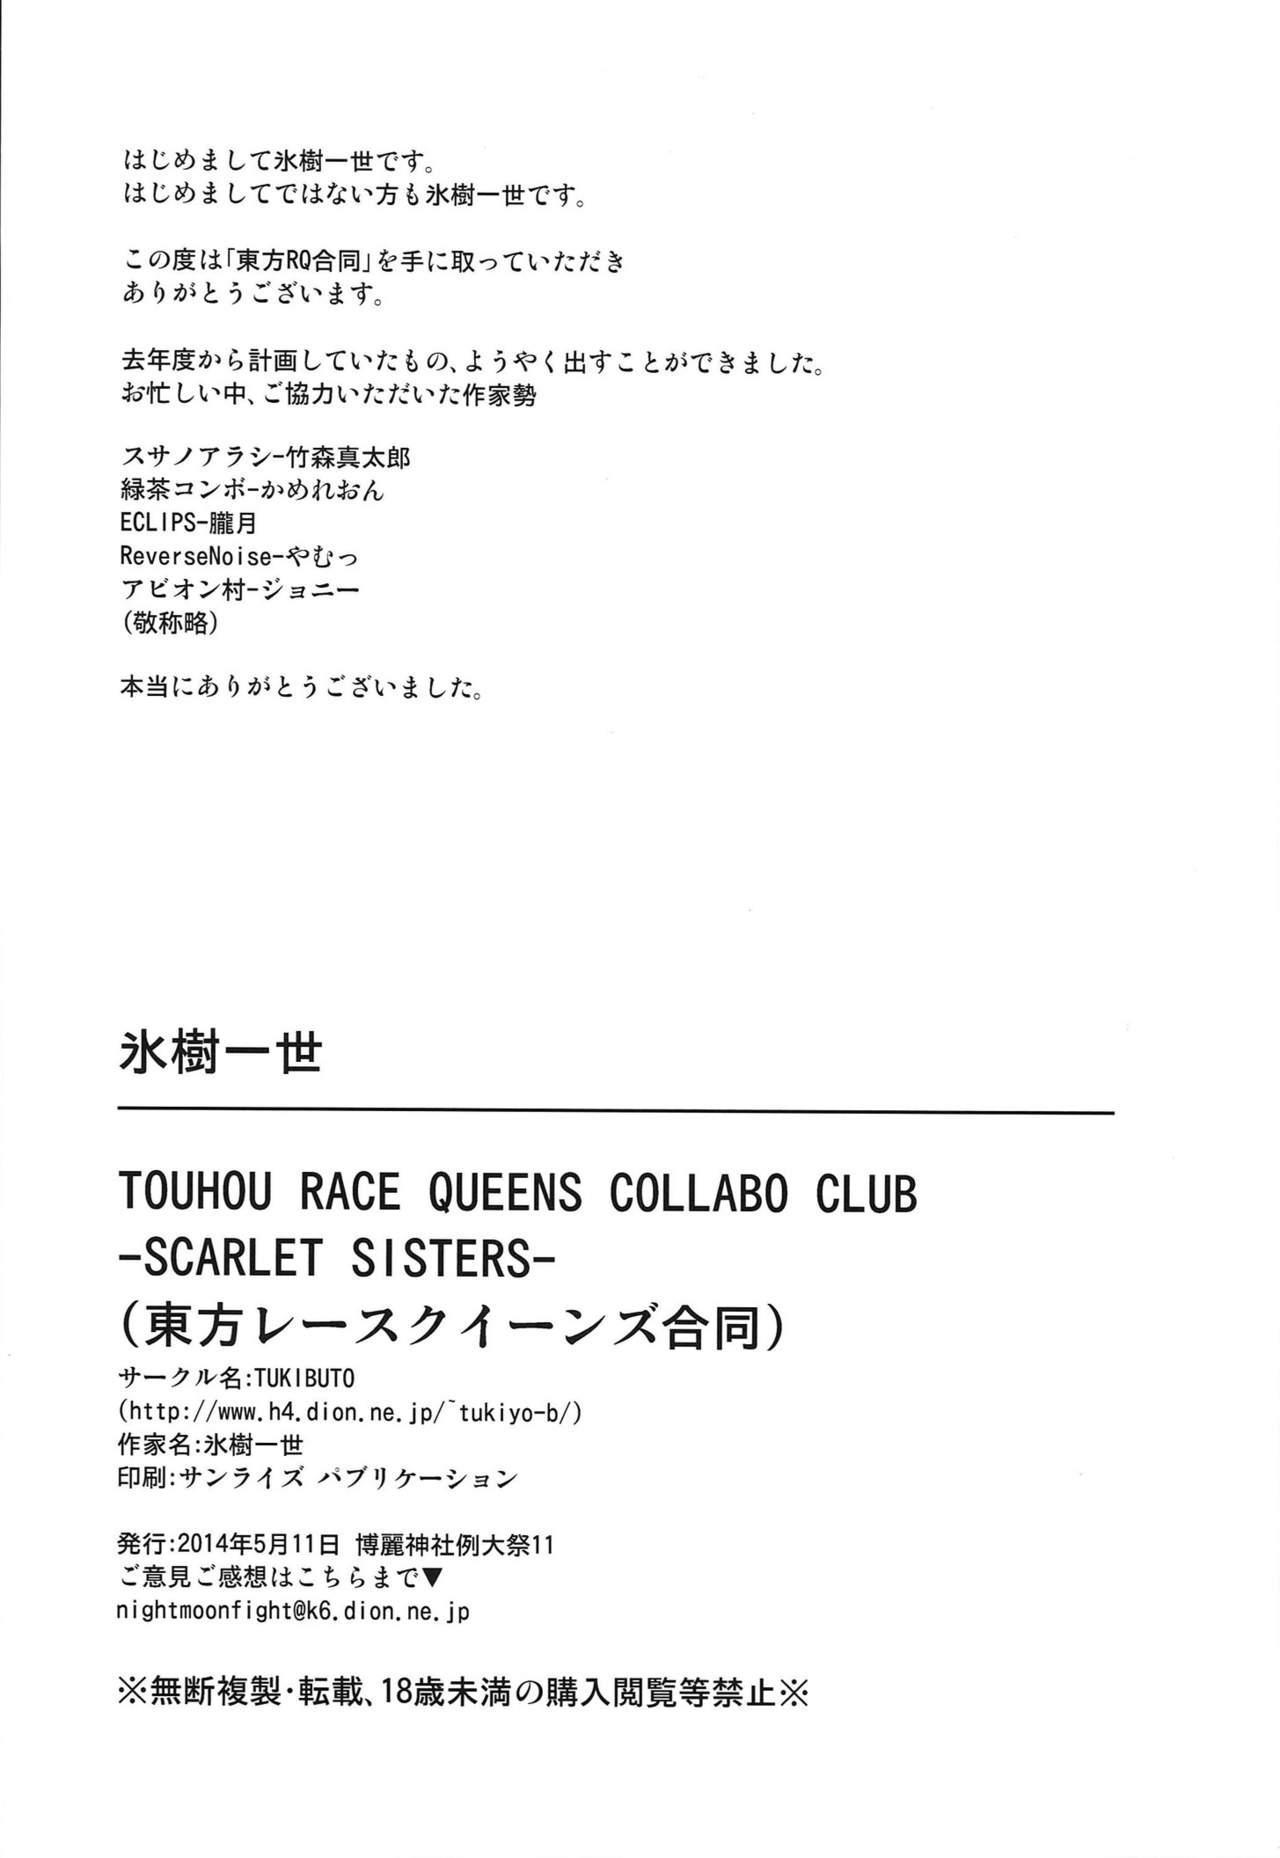 TOUHOU RACE QUEENS COLLABO CLUB 64